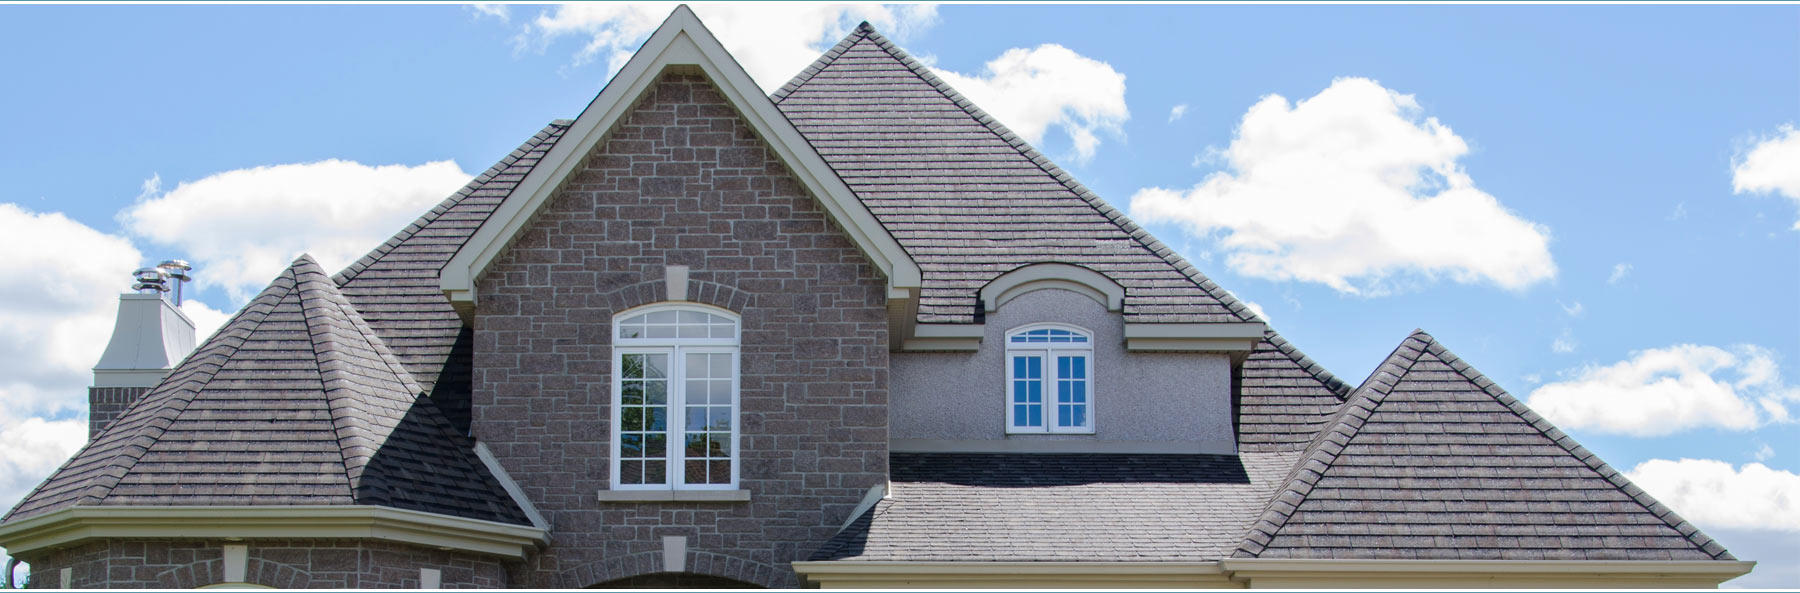 Coomer Roofing Co. Indianapolis (317)783-7261